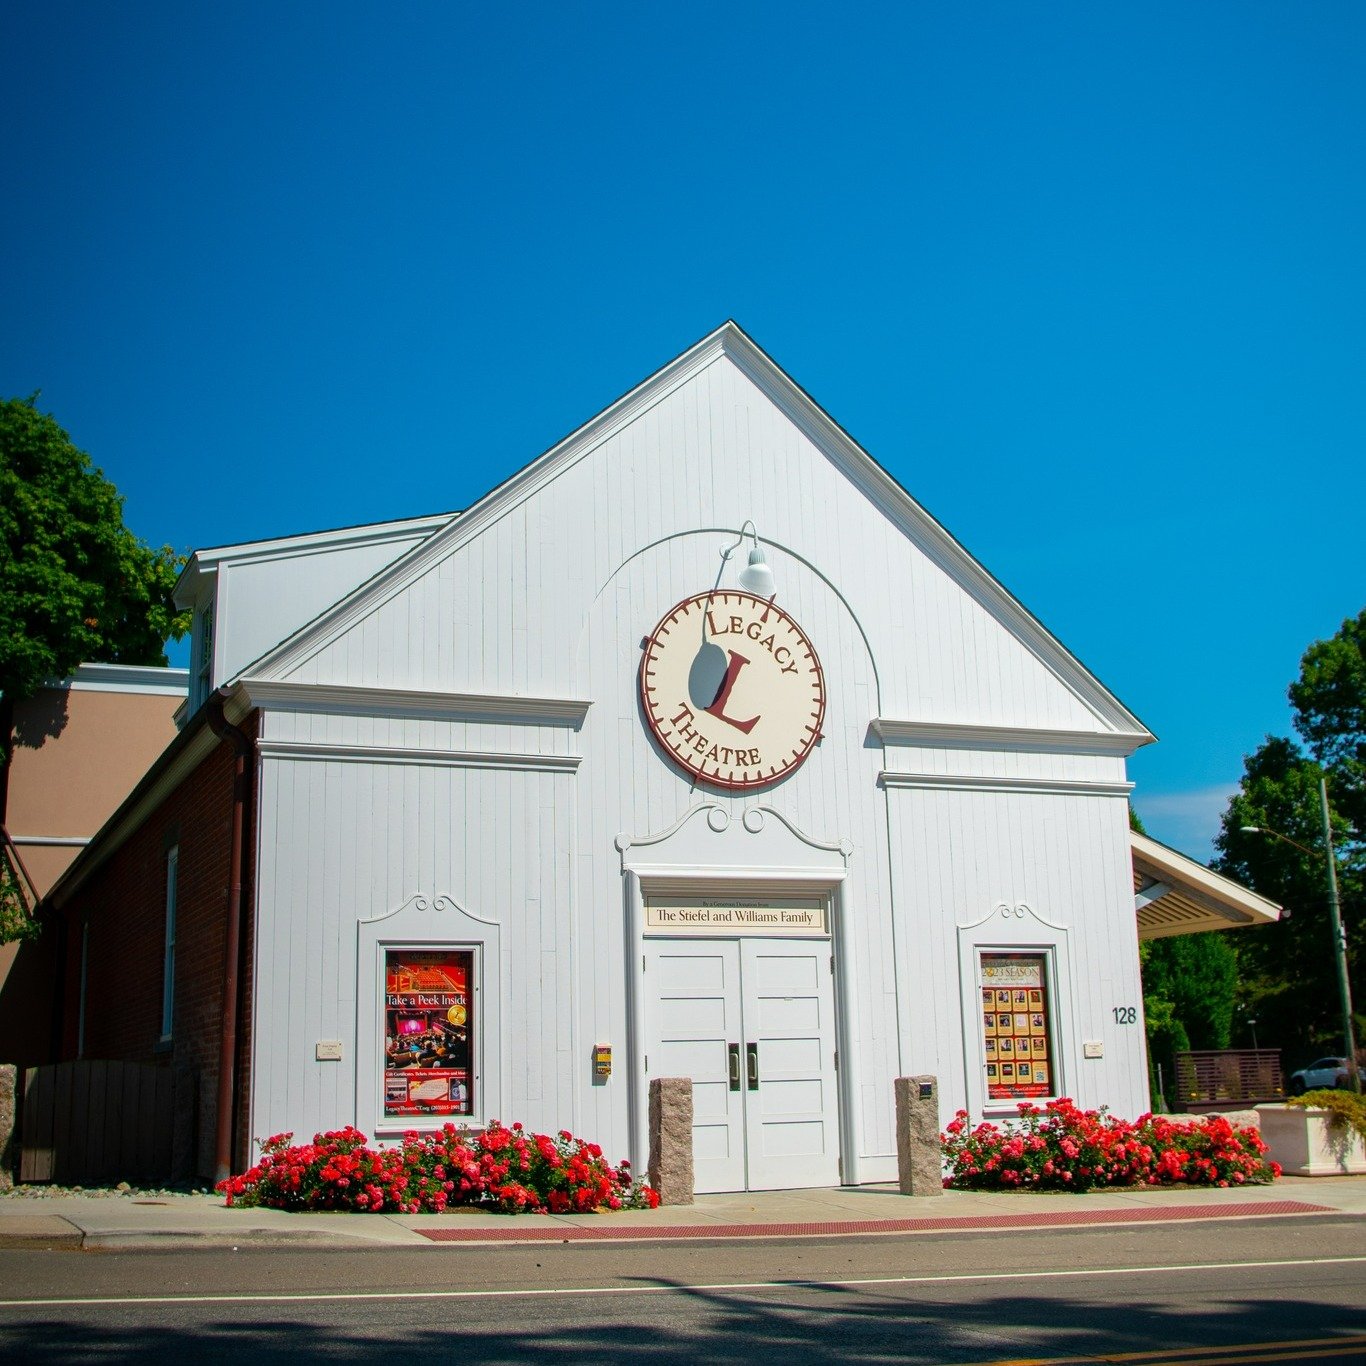 Can you believe it has already been 3 years since we opened our doors to the public down in Stony Creek? We at Legacy are thrilled to be bringing you another season of professional theatre and more from our state-of-the-art building. What&rsquo;s bee